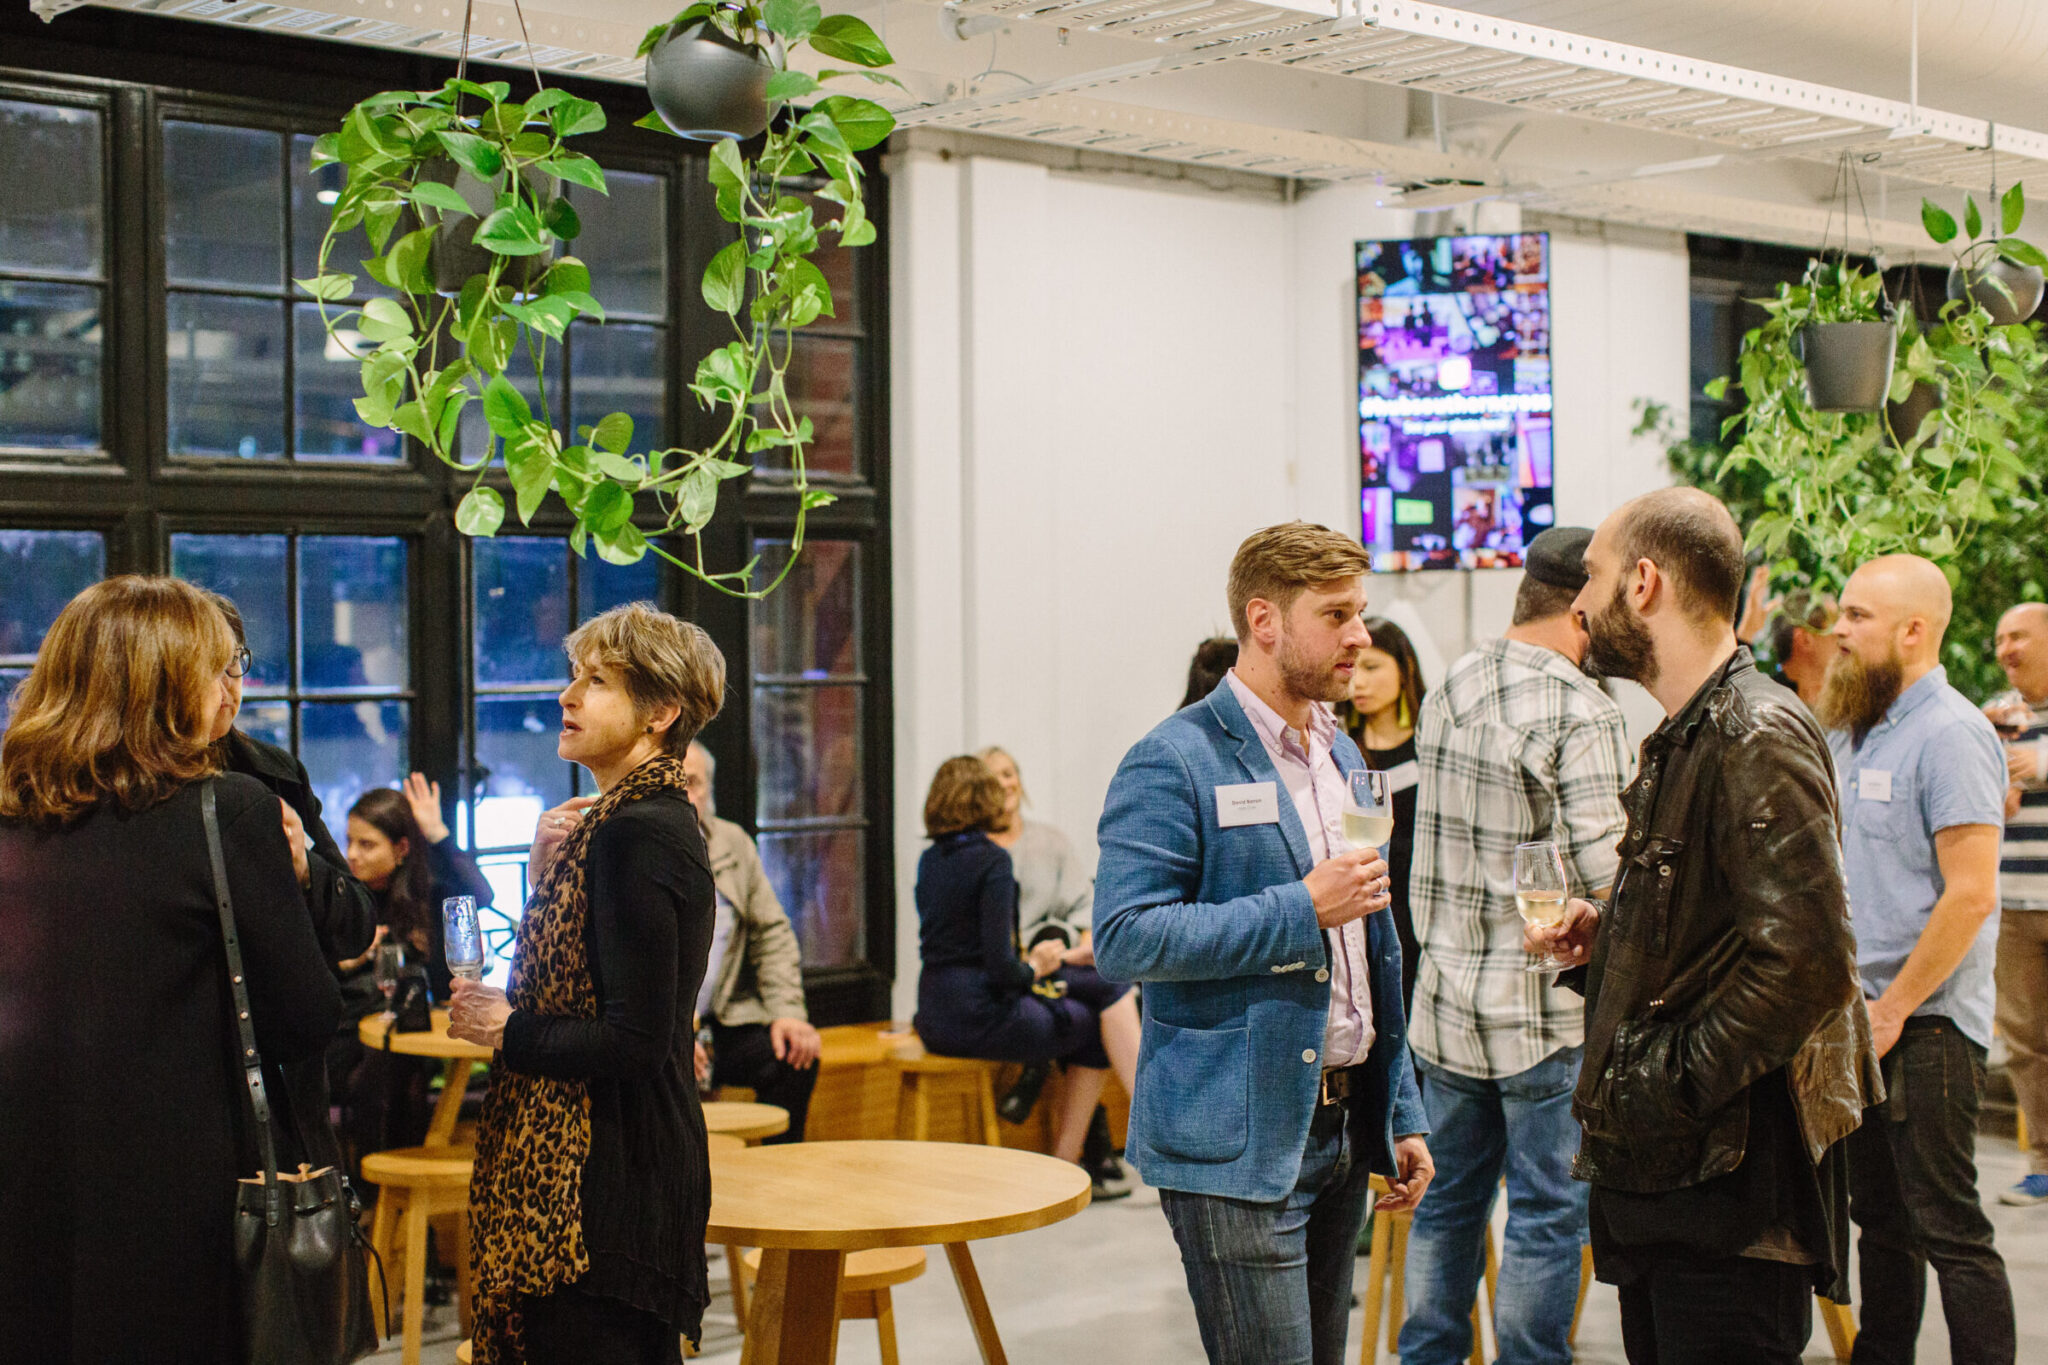  Global Coworking Members at Hub Australia receive access to more than a national coworking network. We're also part of a number of global partnerships and communities, providing access to over 100 spaces around the world.